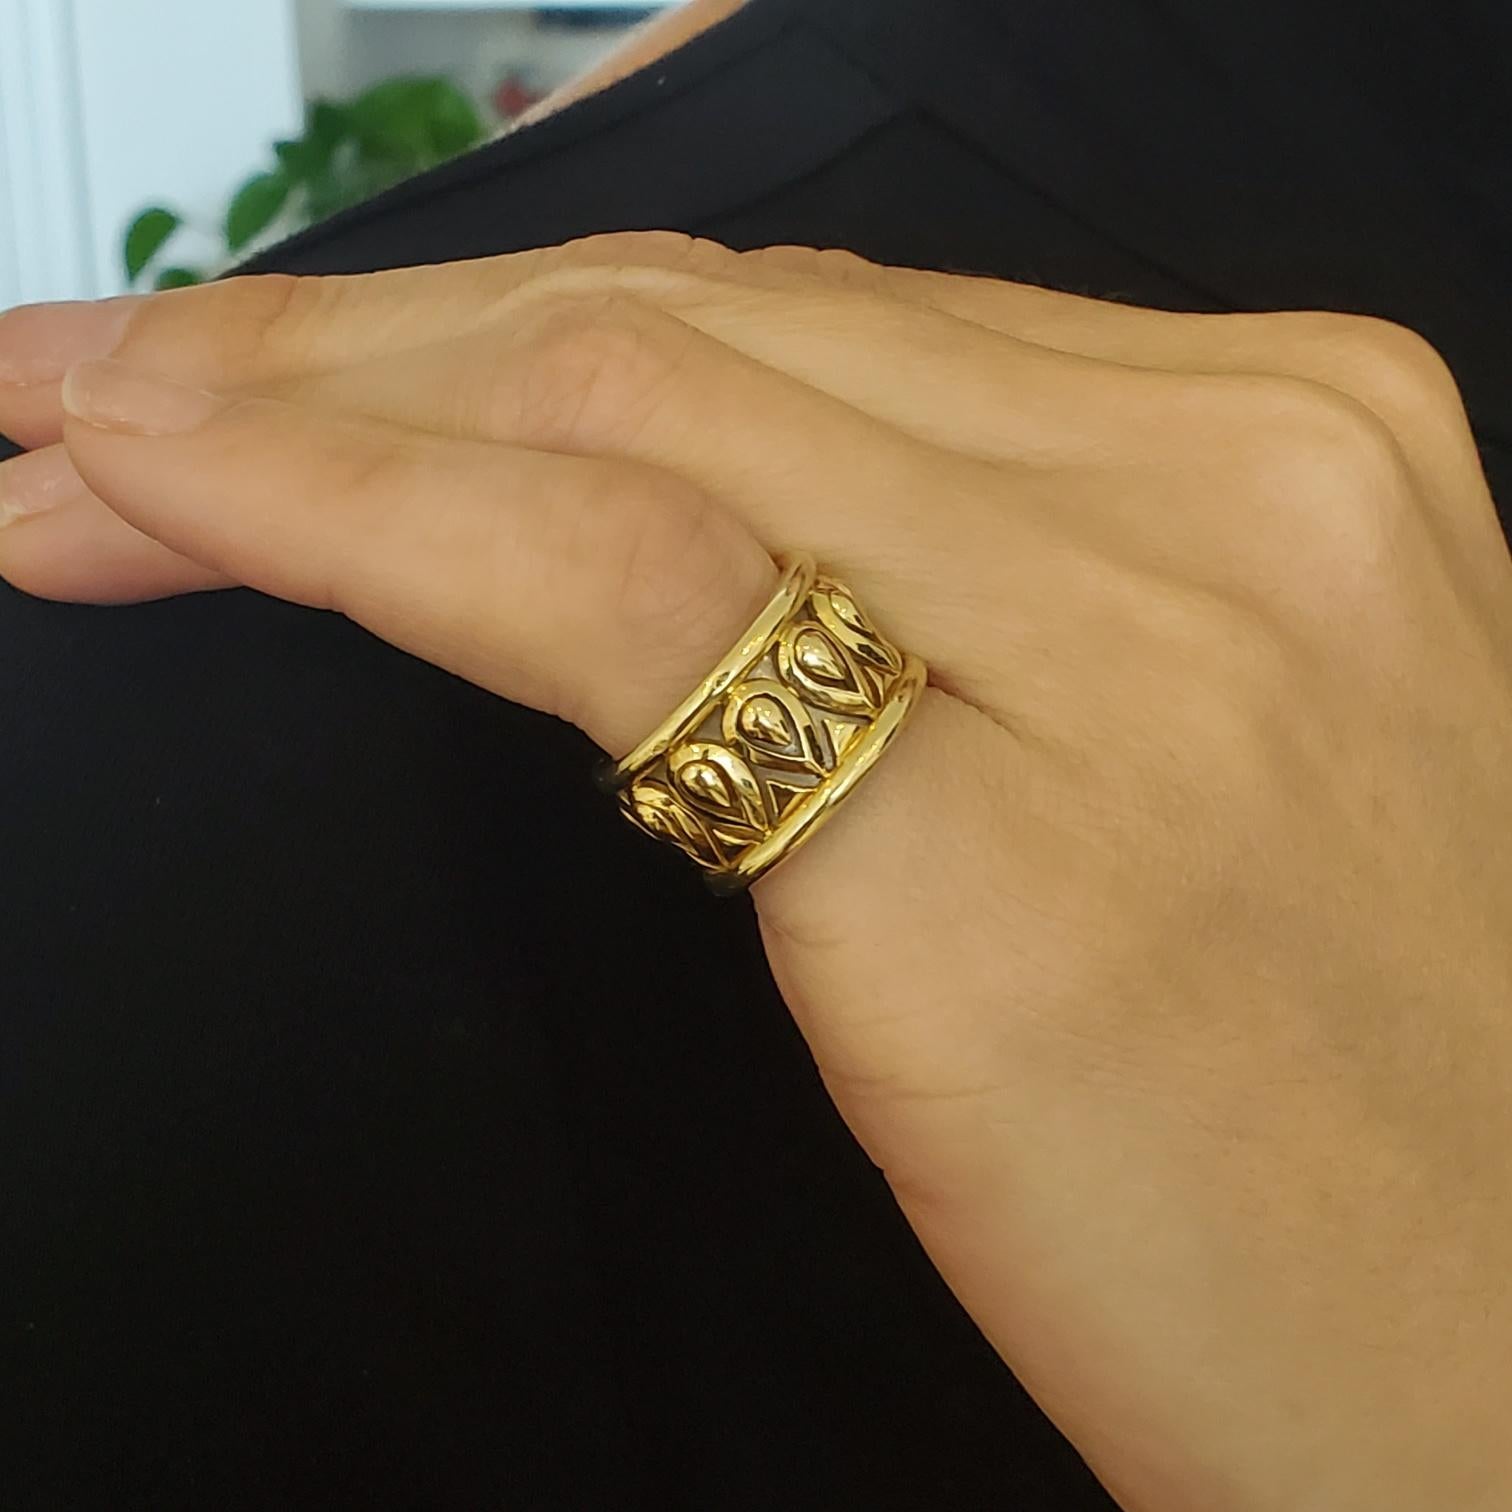 Cartier Paris Rare Tanjore Band Ring in Two Tones of 18Kt Gold 1